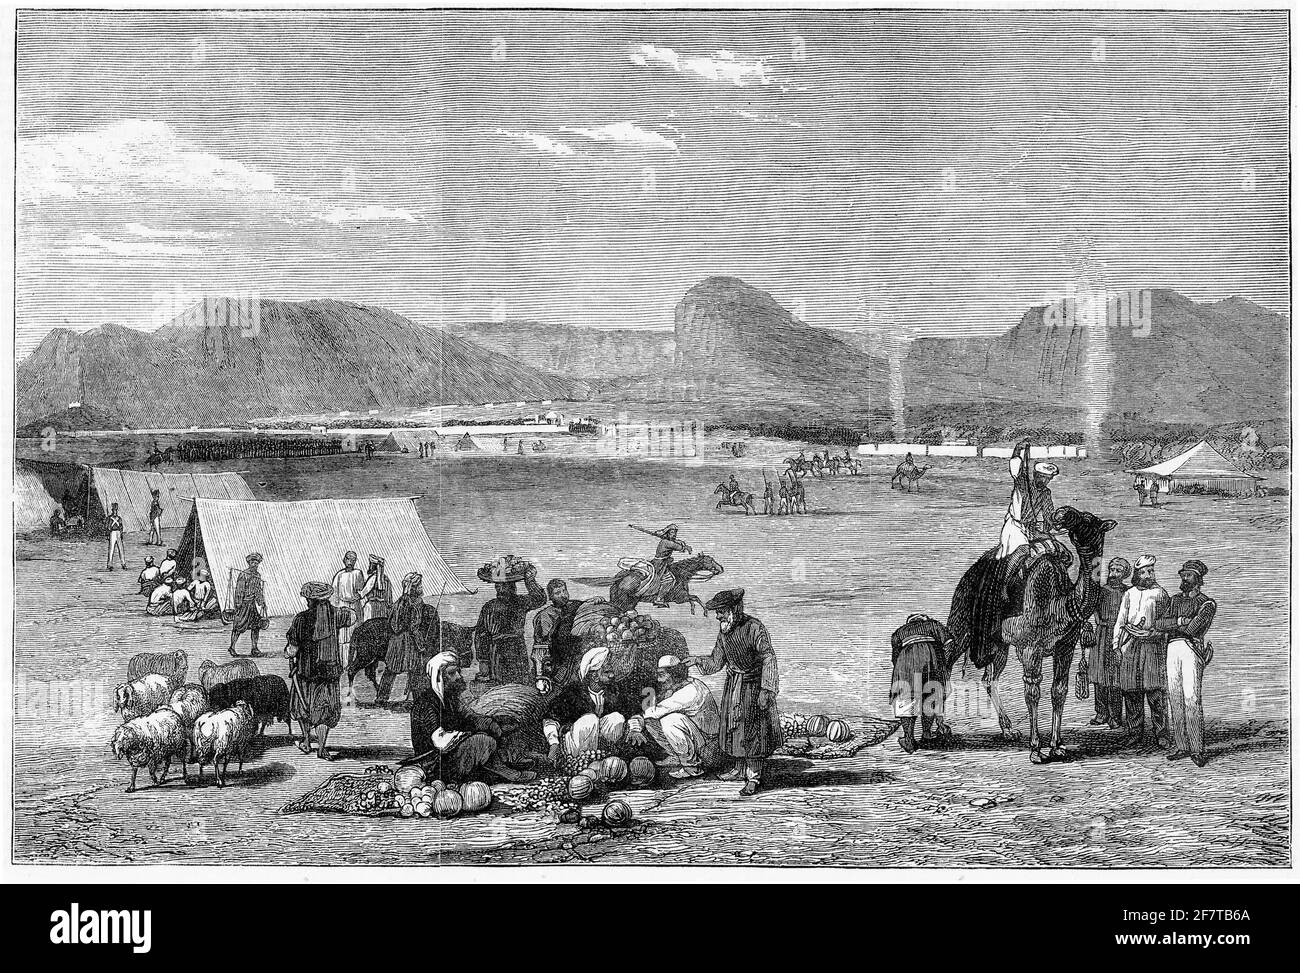 Engraving of he city of Kandahar occupied by General Sir Donald Stewart during the second Anglo-Afghan War, Afghanistan, January 9, 1879 Stock Photo